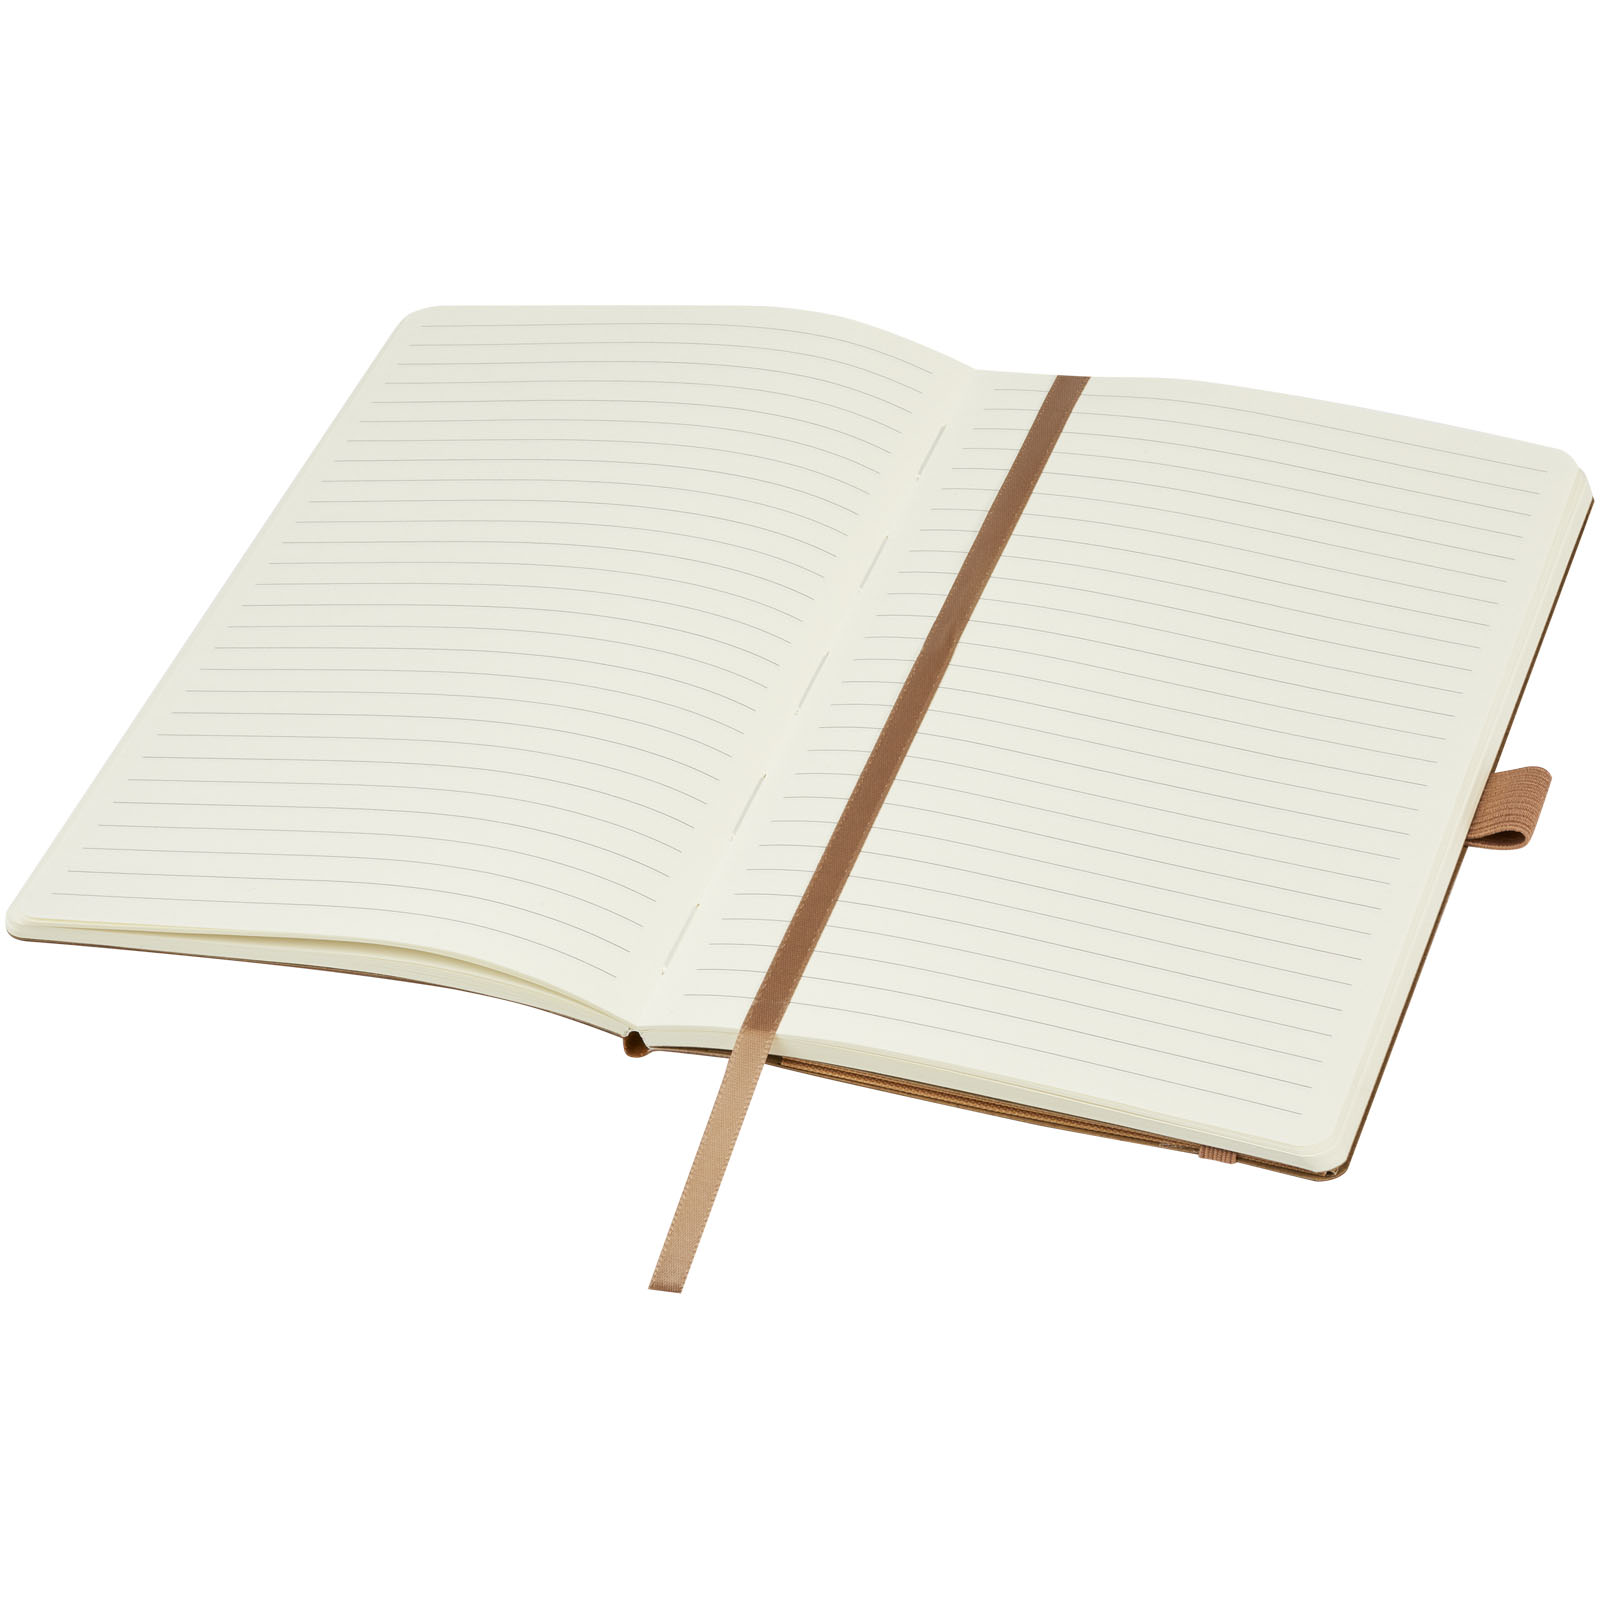 Advertising Soft cover notebooks - Kilau recycled leather notebook  - 3